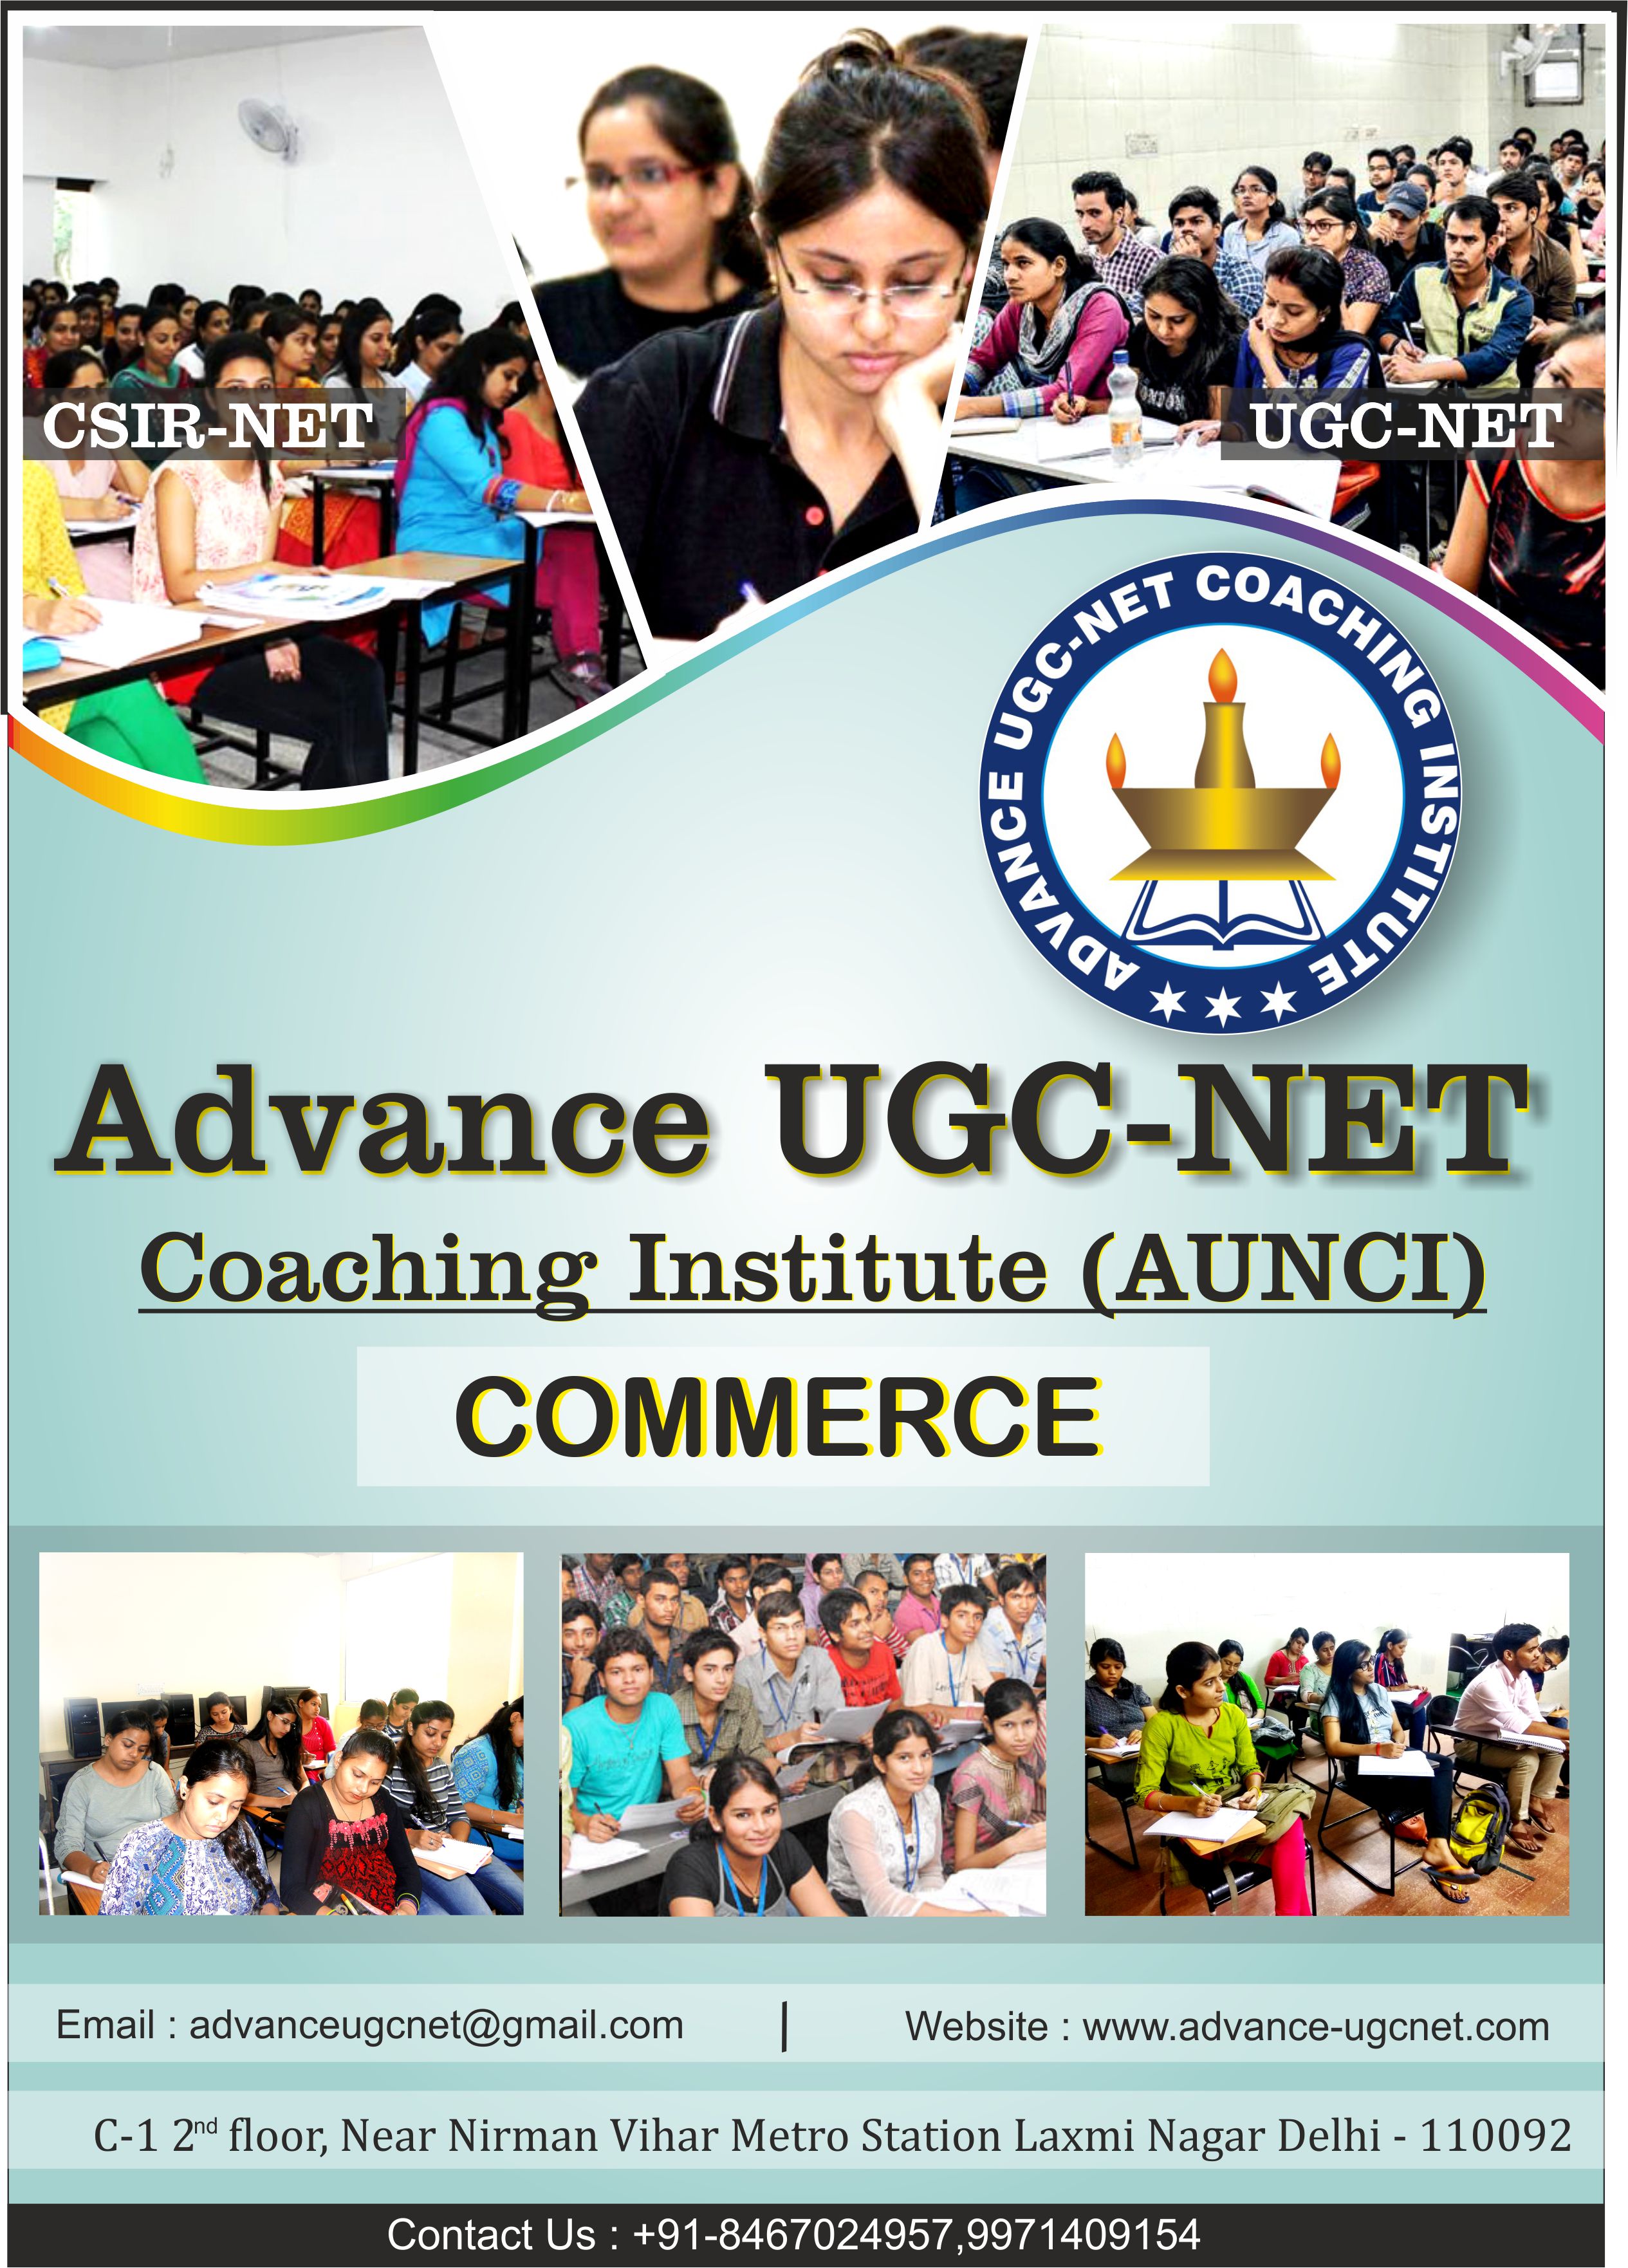 ugc net coaching institute for commerce in delhi, ugc net coaching for commerce in delhi, Ugc net coaching classes for commerce in delhi, UGC net Coaching academy for commerce in delhi, coaching classes for ugc net commerce